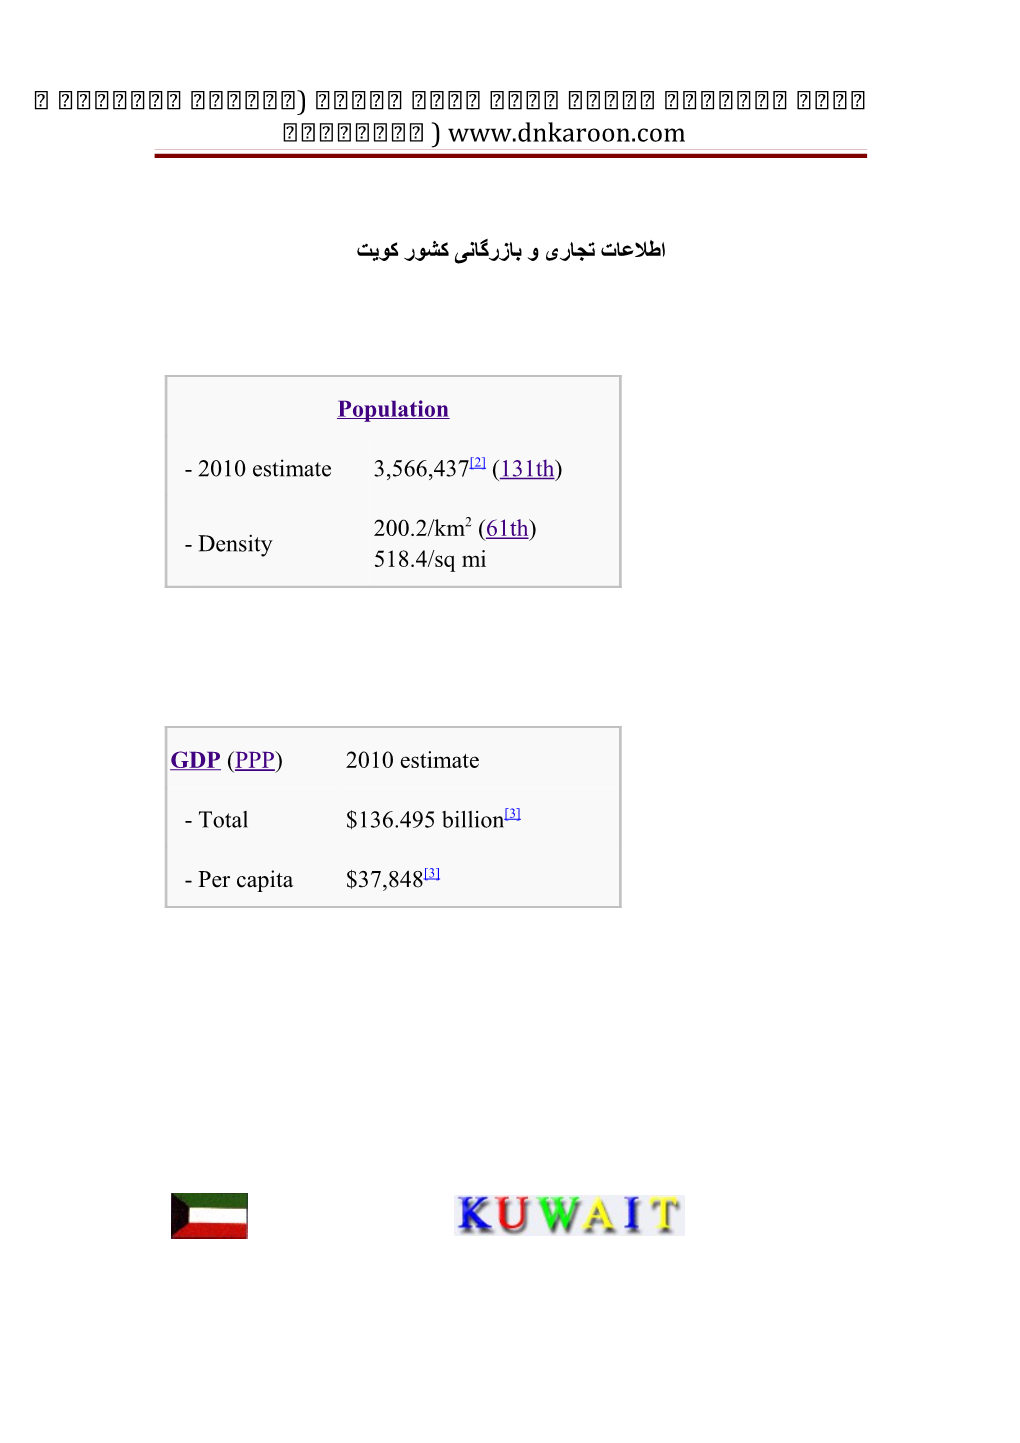 Kuwait City, the Main Economic Hub of the Country